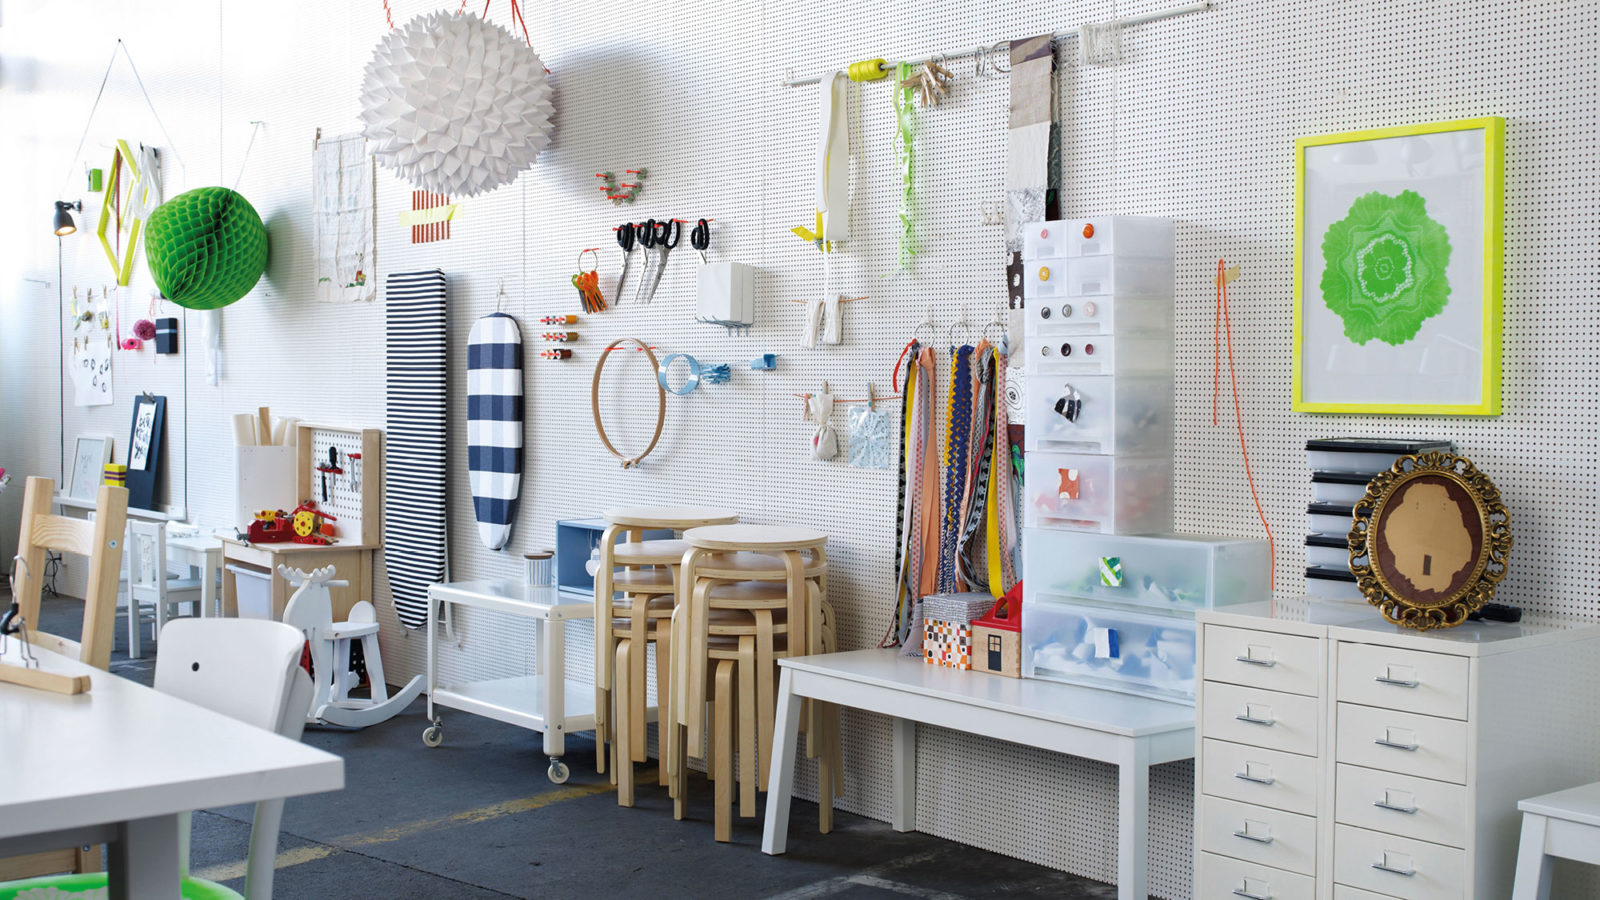 White wall holds tools, textiles, ironing boards and decorations. In front are stacked stools, tables and storage.